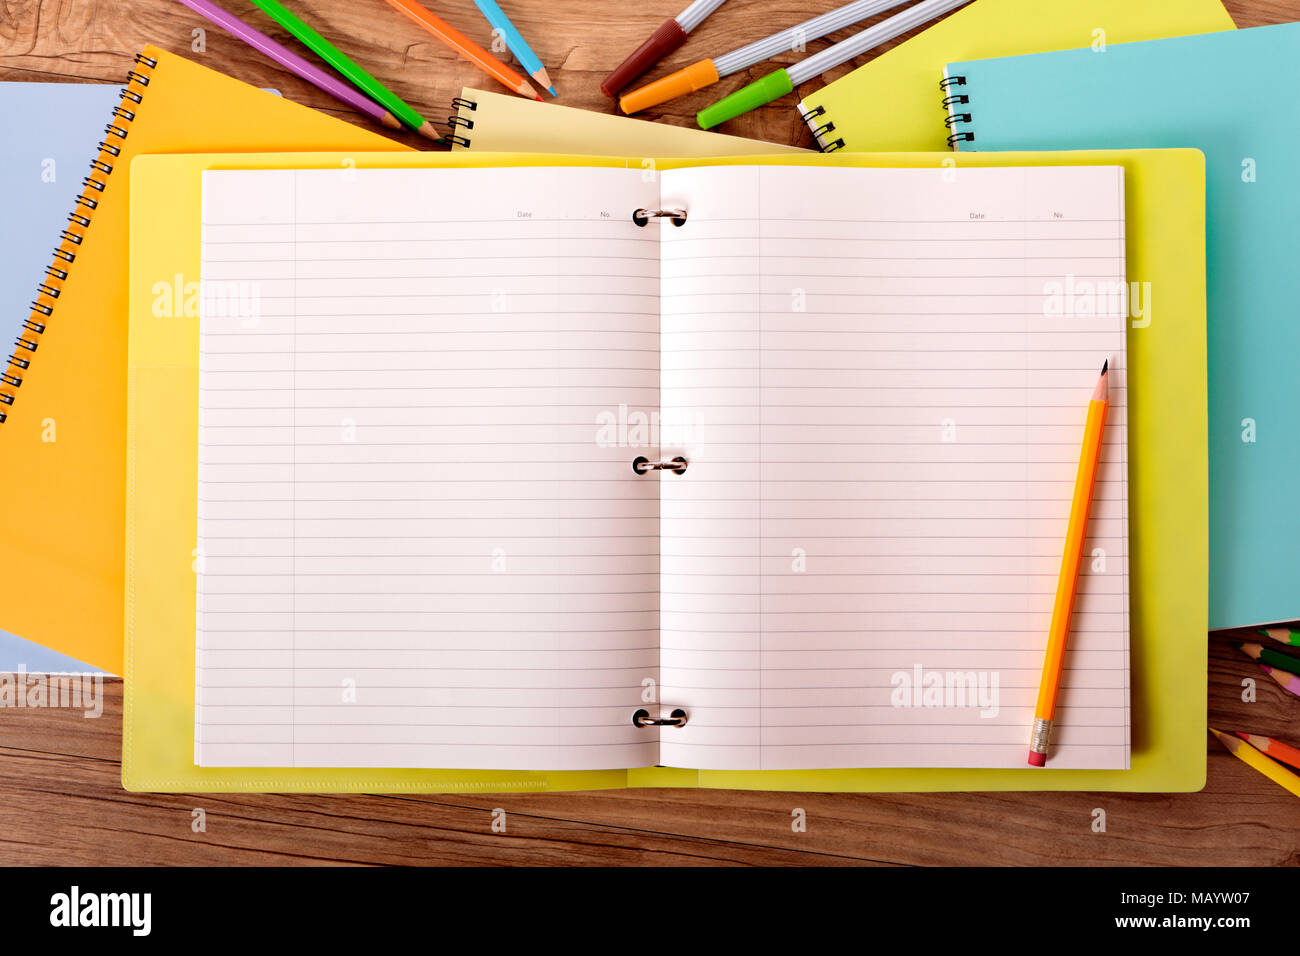 Student's desk with yellow project folder surrounded by various pens, pencils and notebooks. Stock Photo